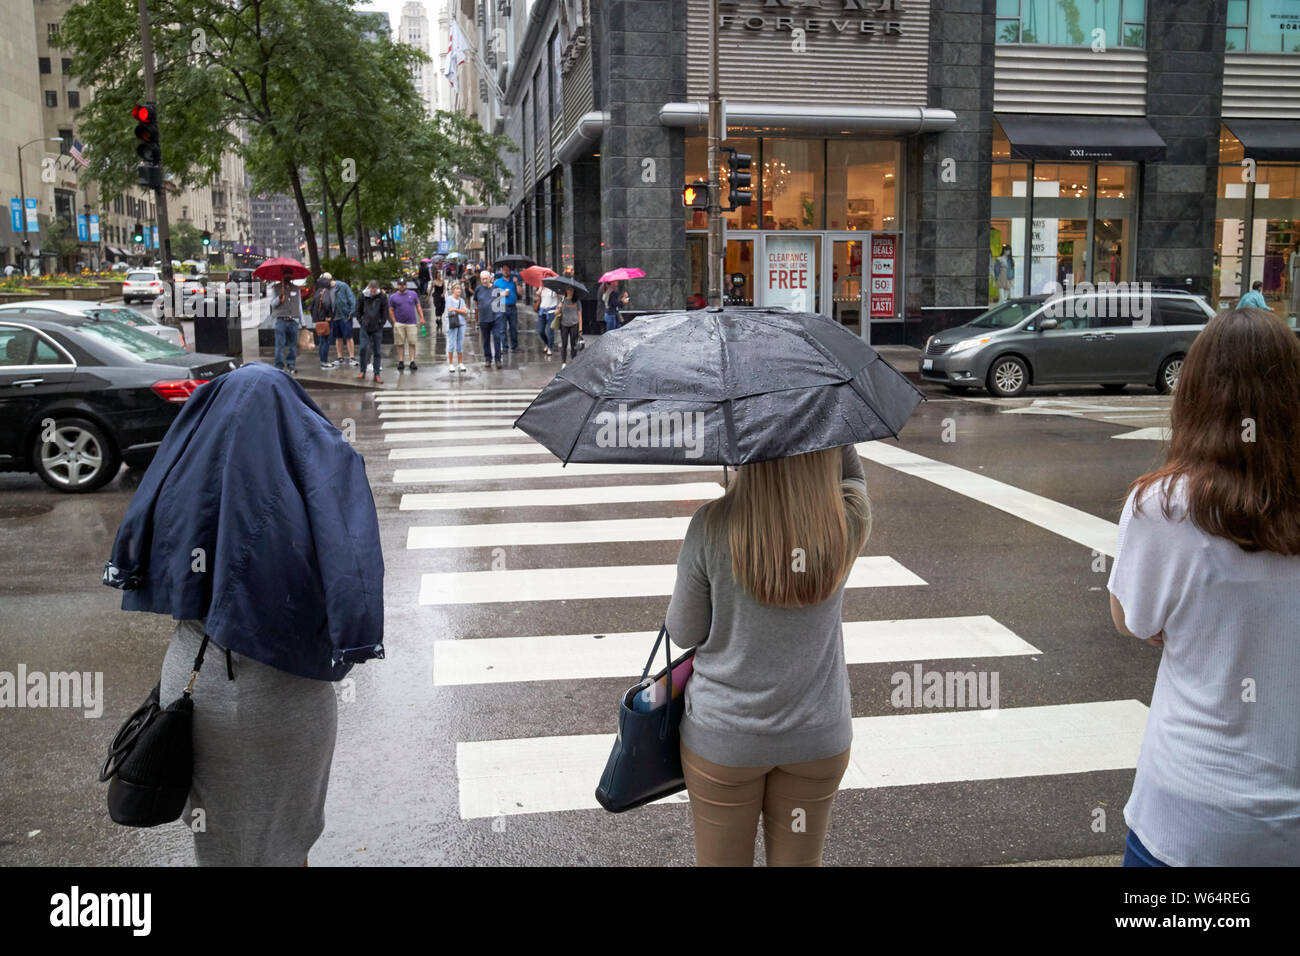 women holding umbrellas and coat over head stand at crosswalk waiting in the rain on michigan avenue downtown Chicago IL USA Stock Photo